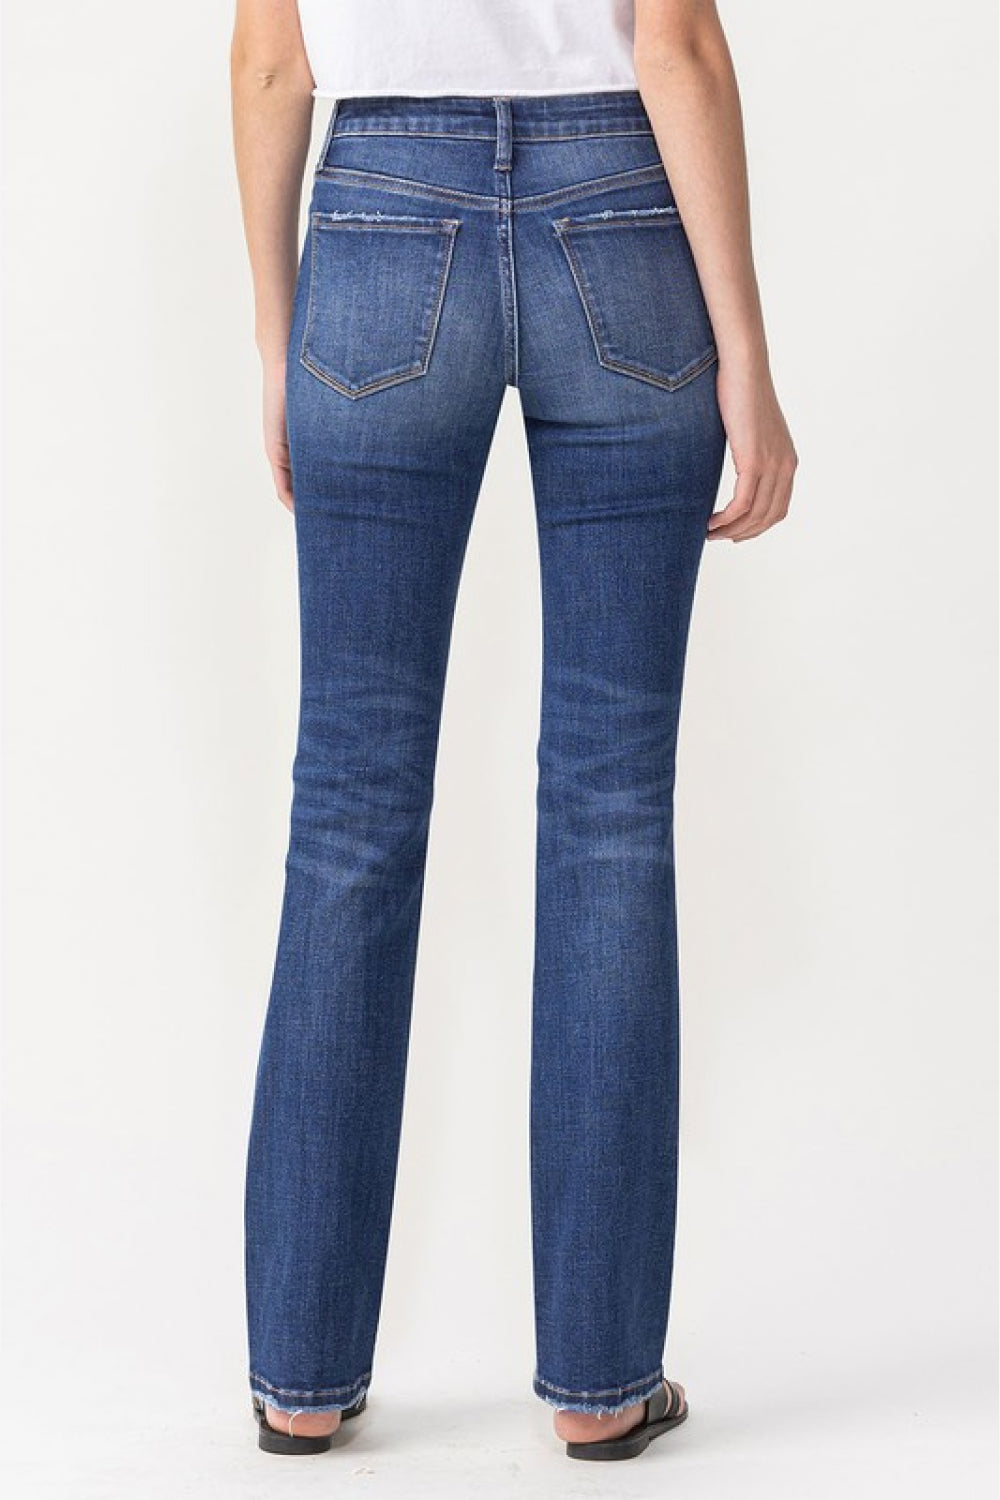 Lovervet Rebecca Midrise Bootcut Jeans - Online Only